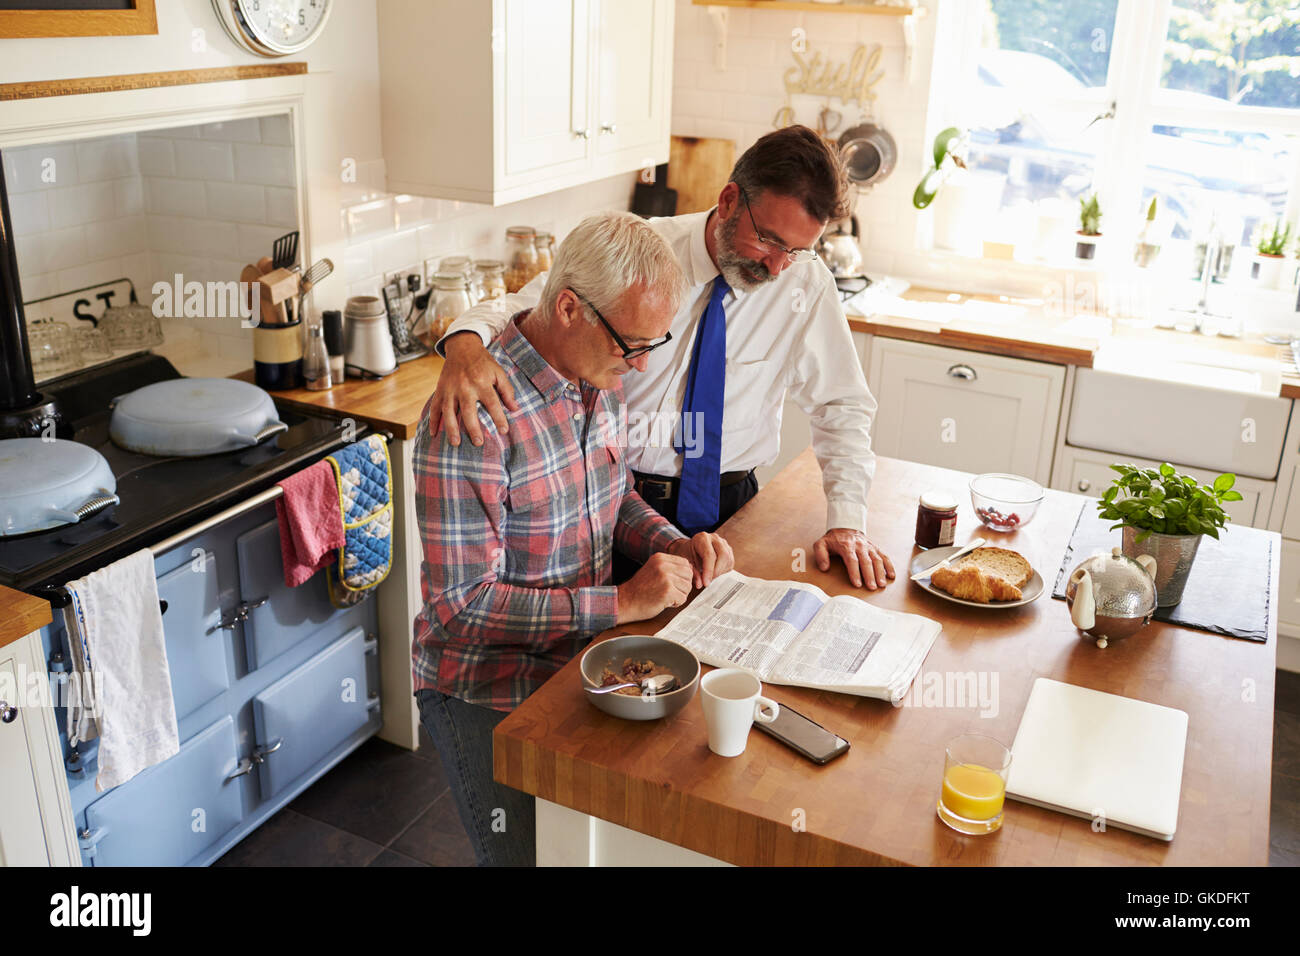 Male couple reading paper together in kitchen, elevated view Stock Photo